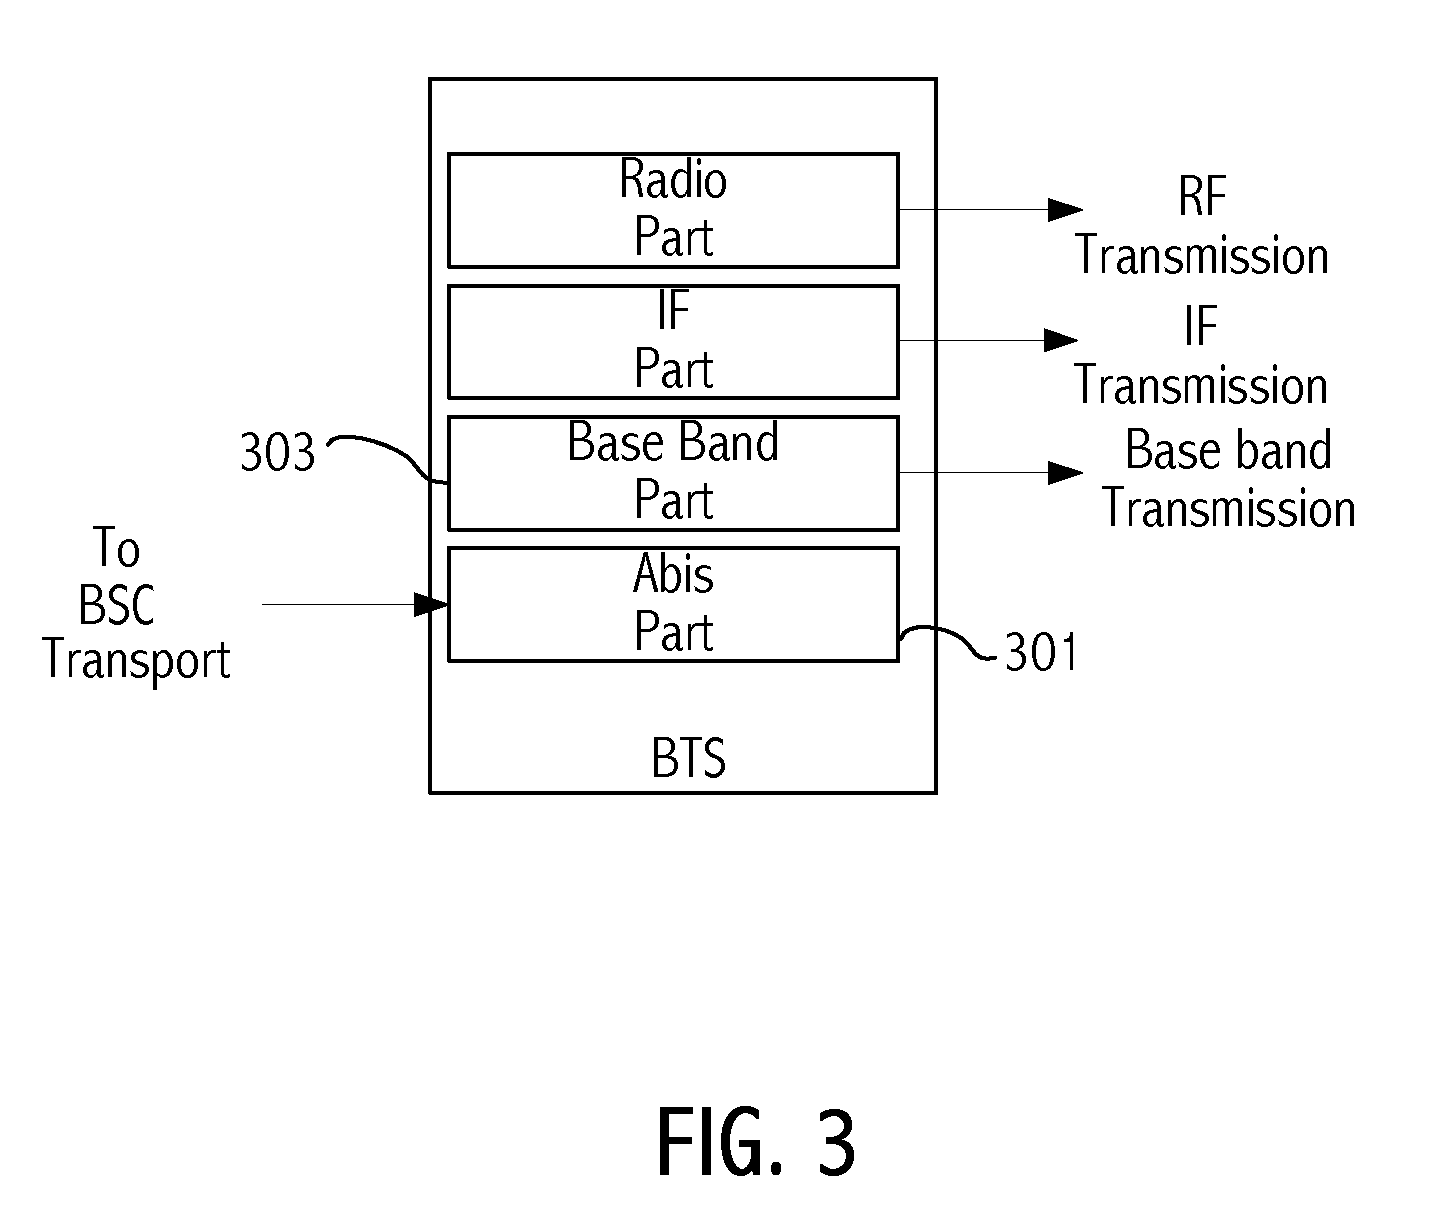 Method and apparatus to maintain network coverage when using a transport media to communicate with a remote antenna